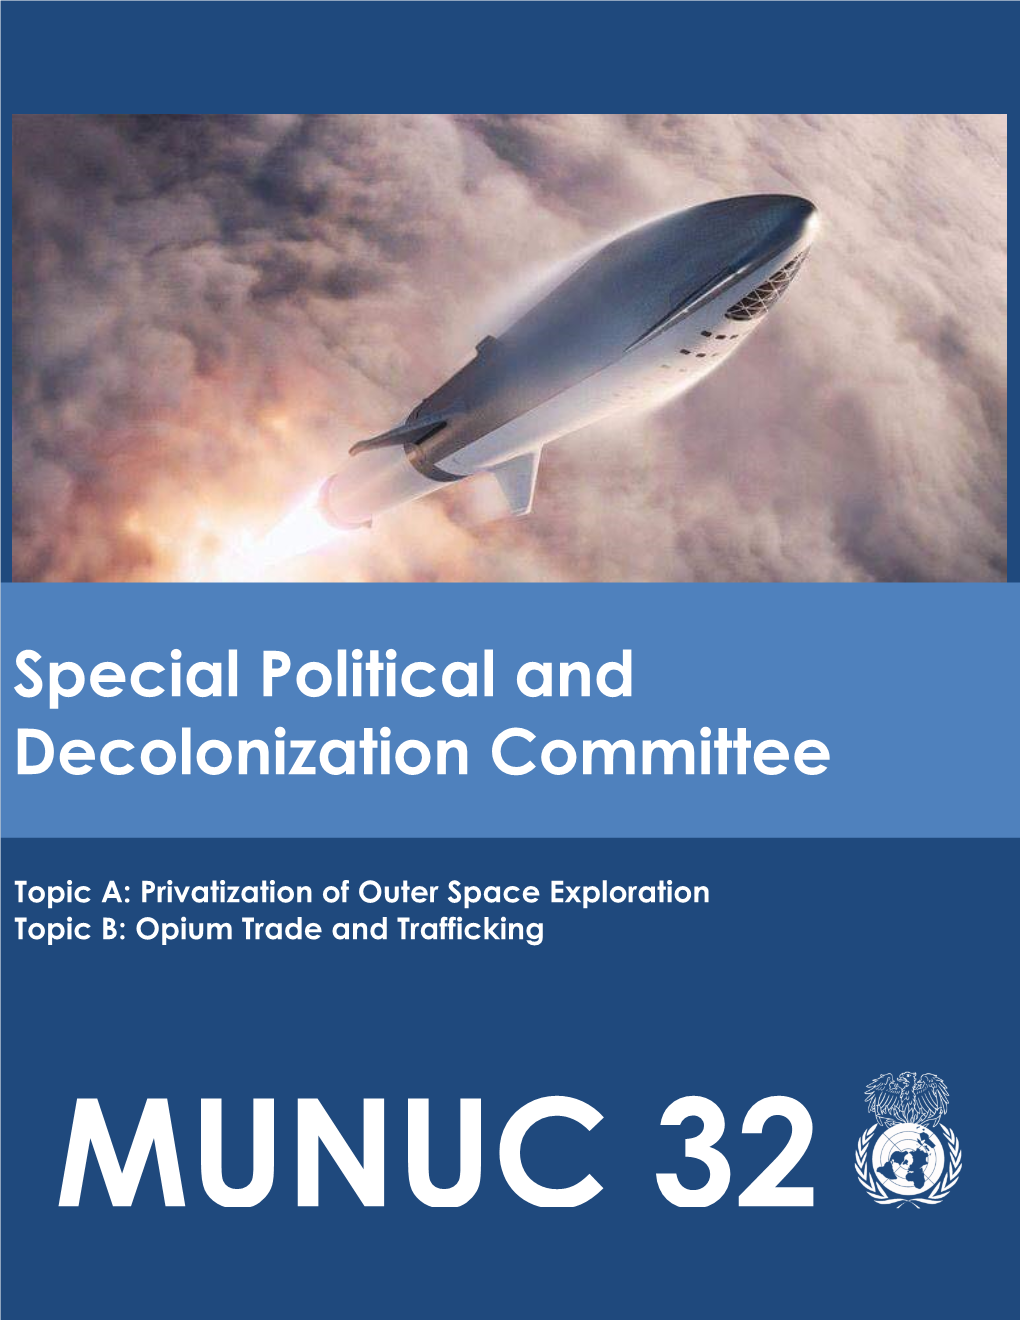 Special Political and Decolonization Committee